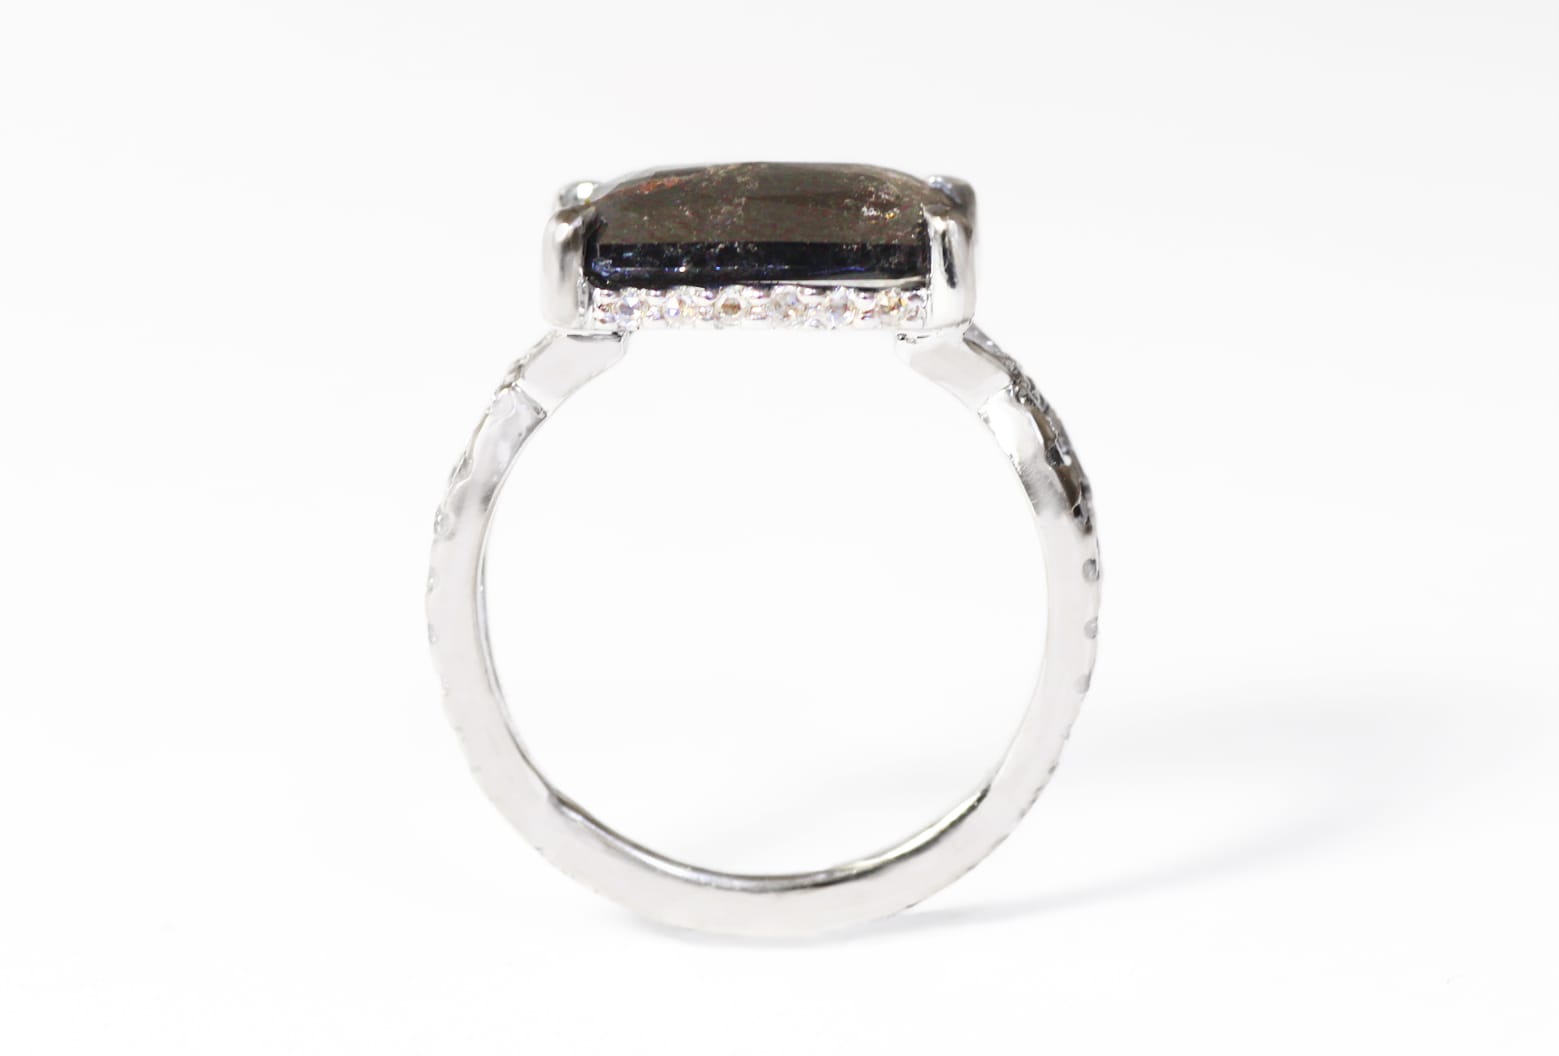 Salt and pepper diamond in 18ct Fairtrade gold with diamonds